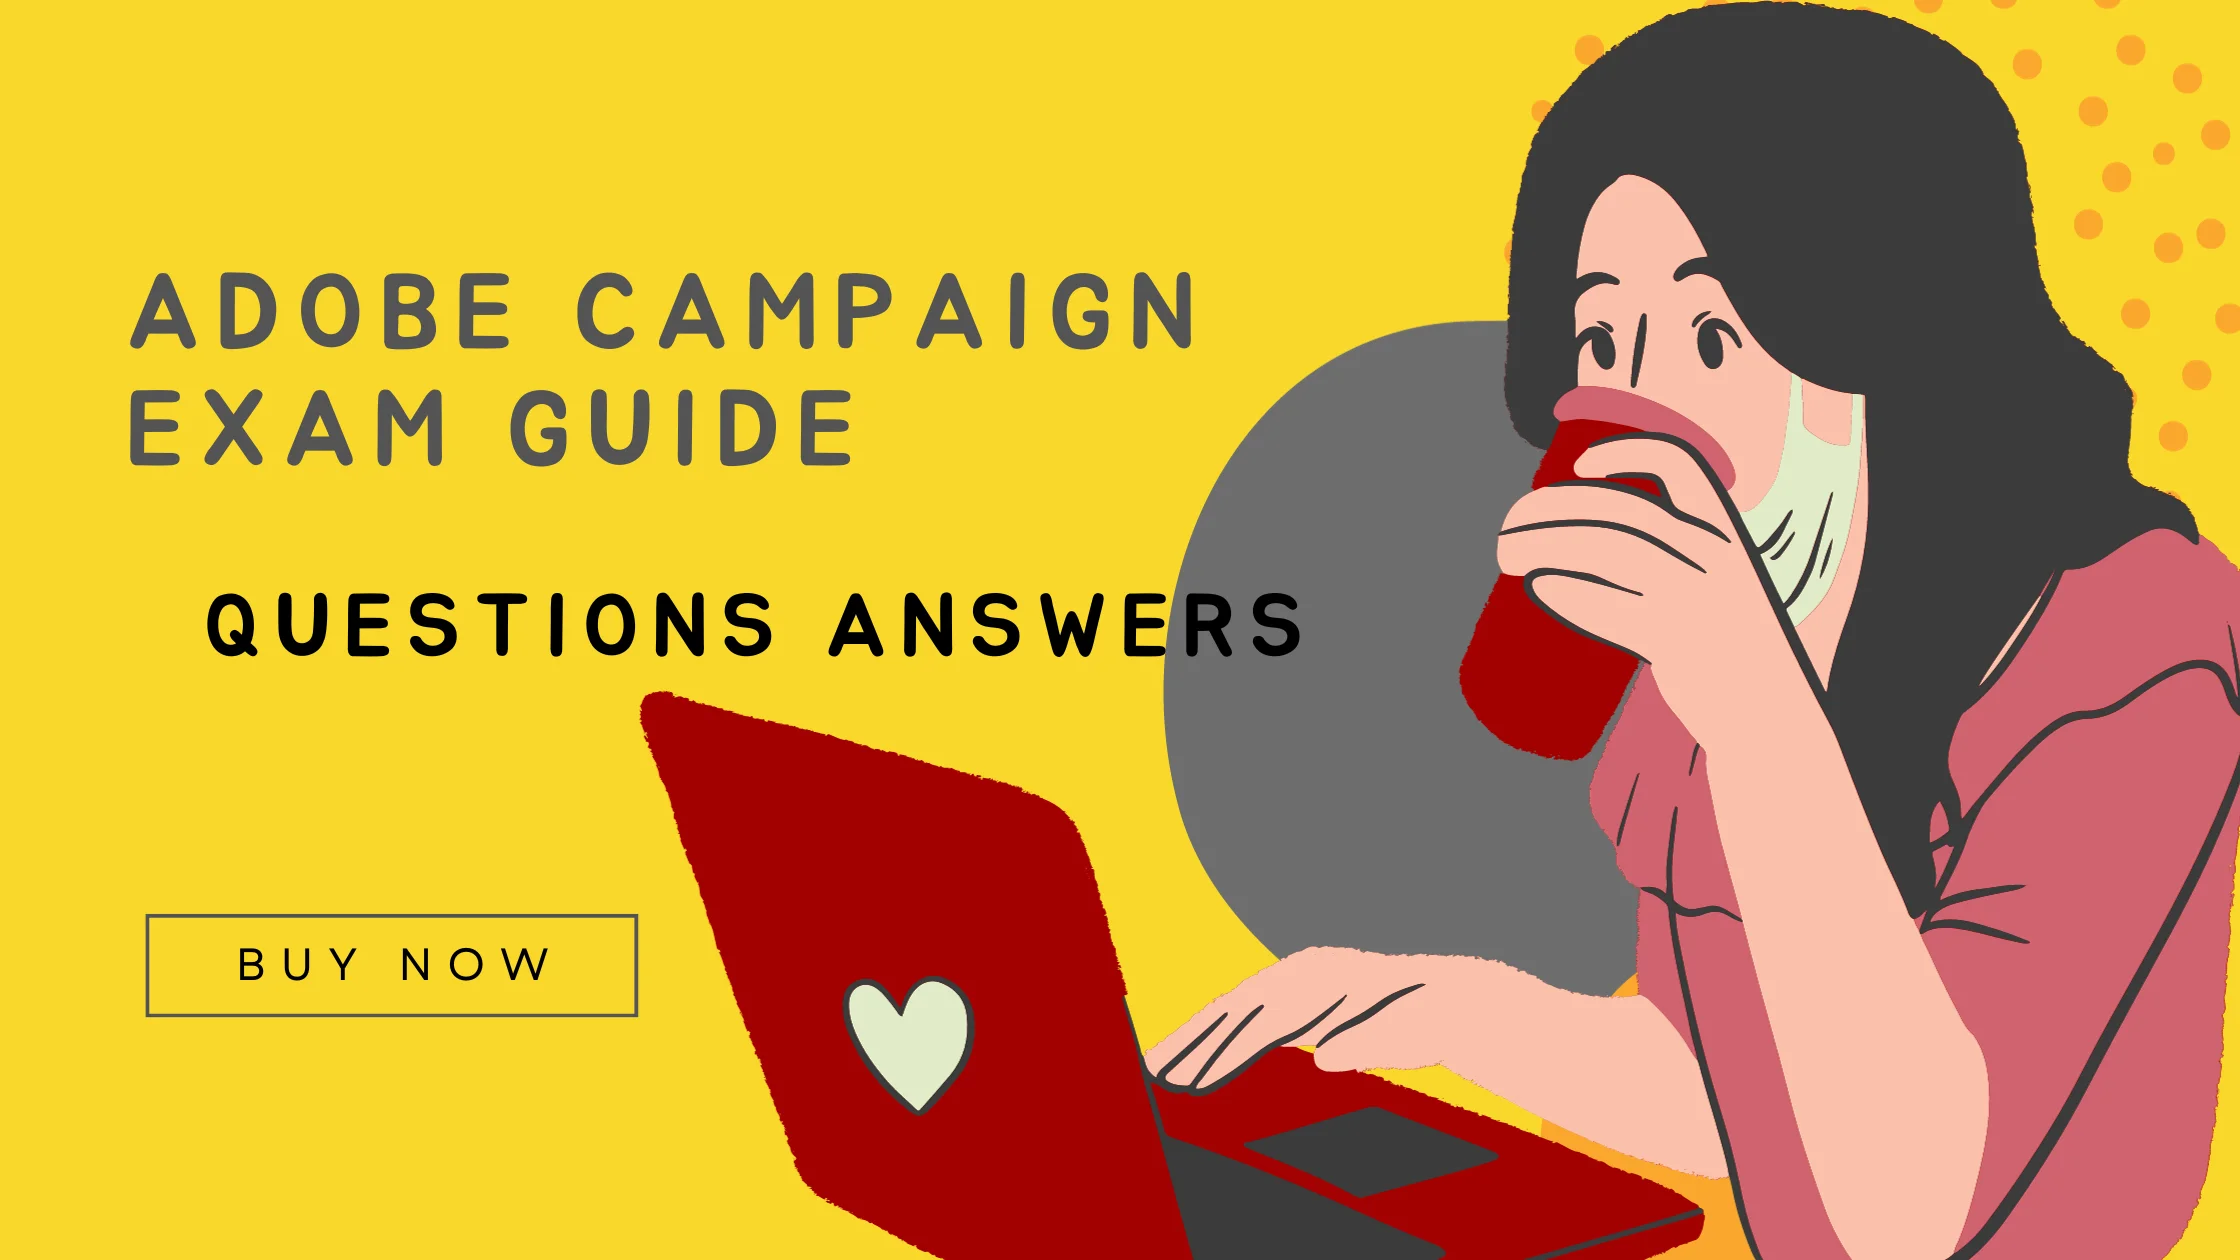 Adobe Campaign exam guide promotion